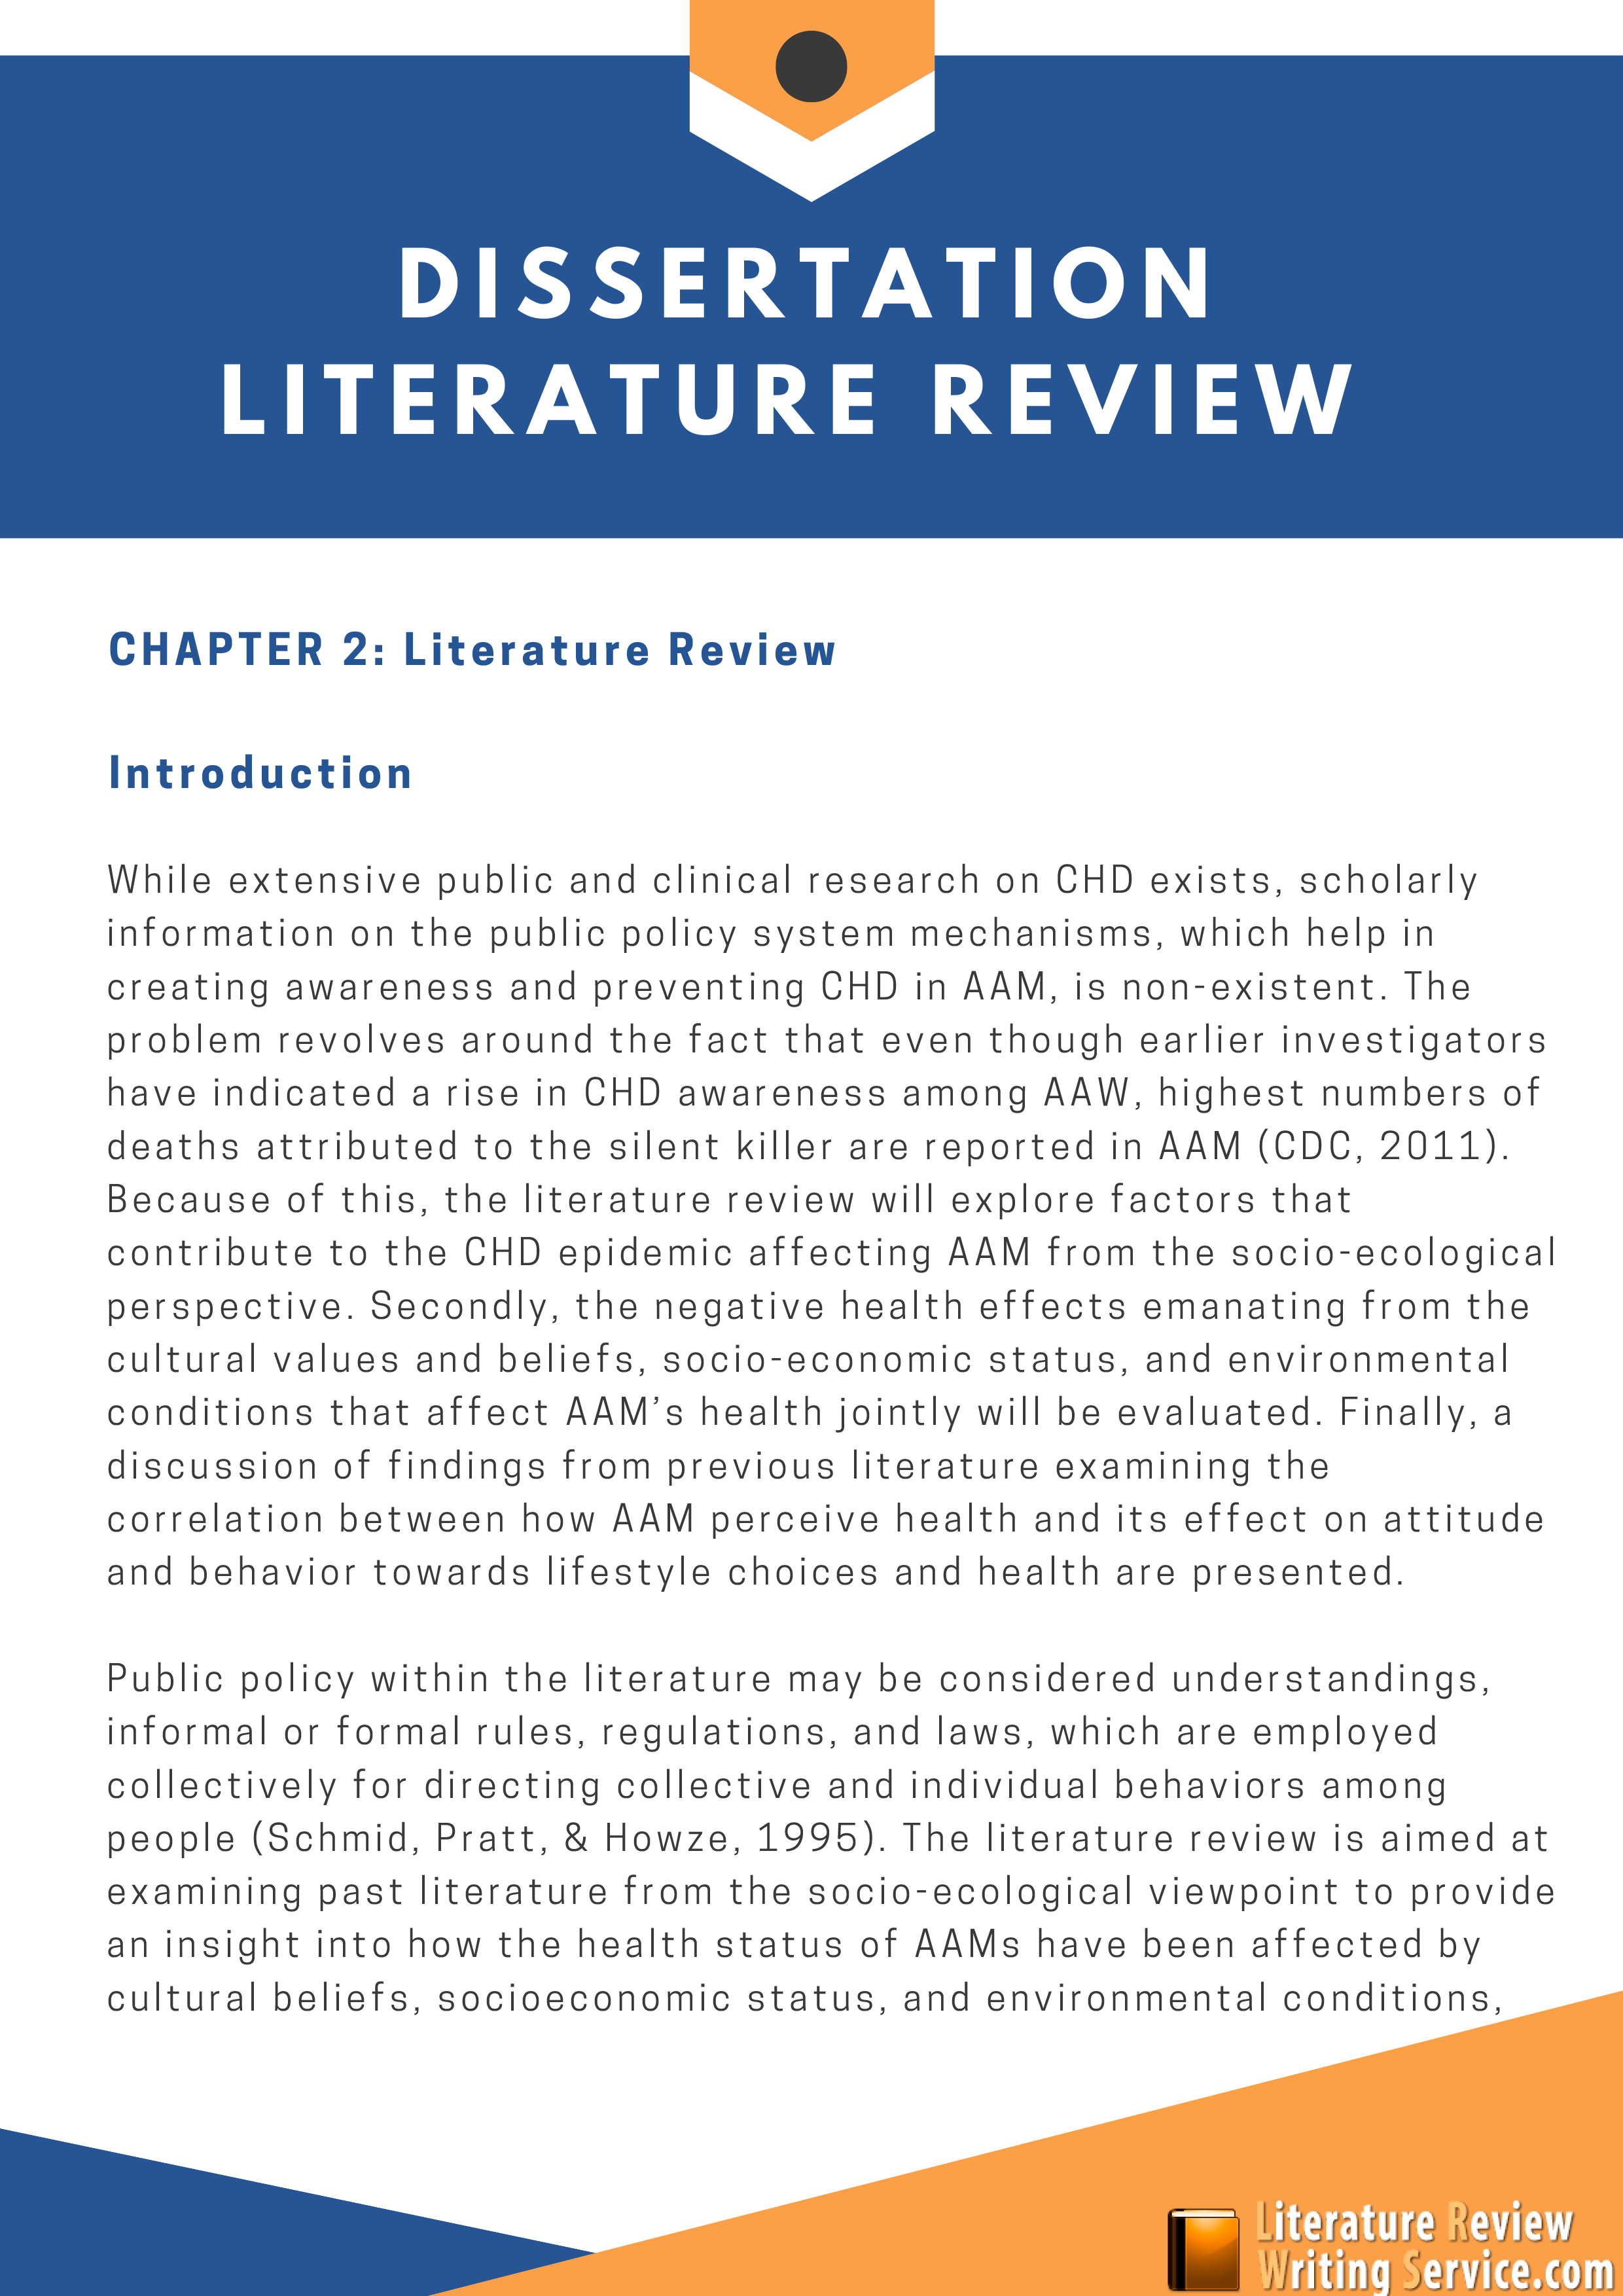 sources of literature for literature review